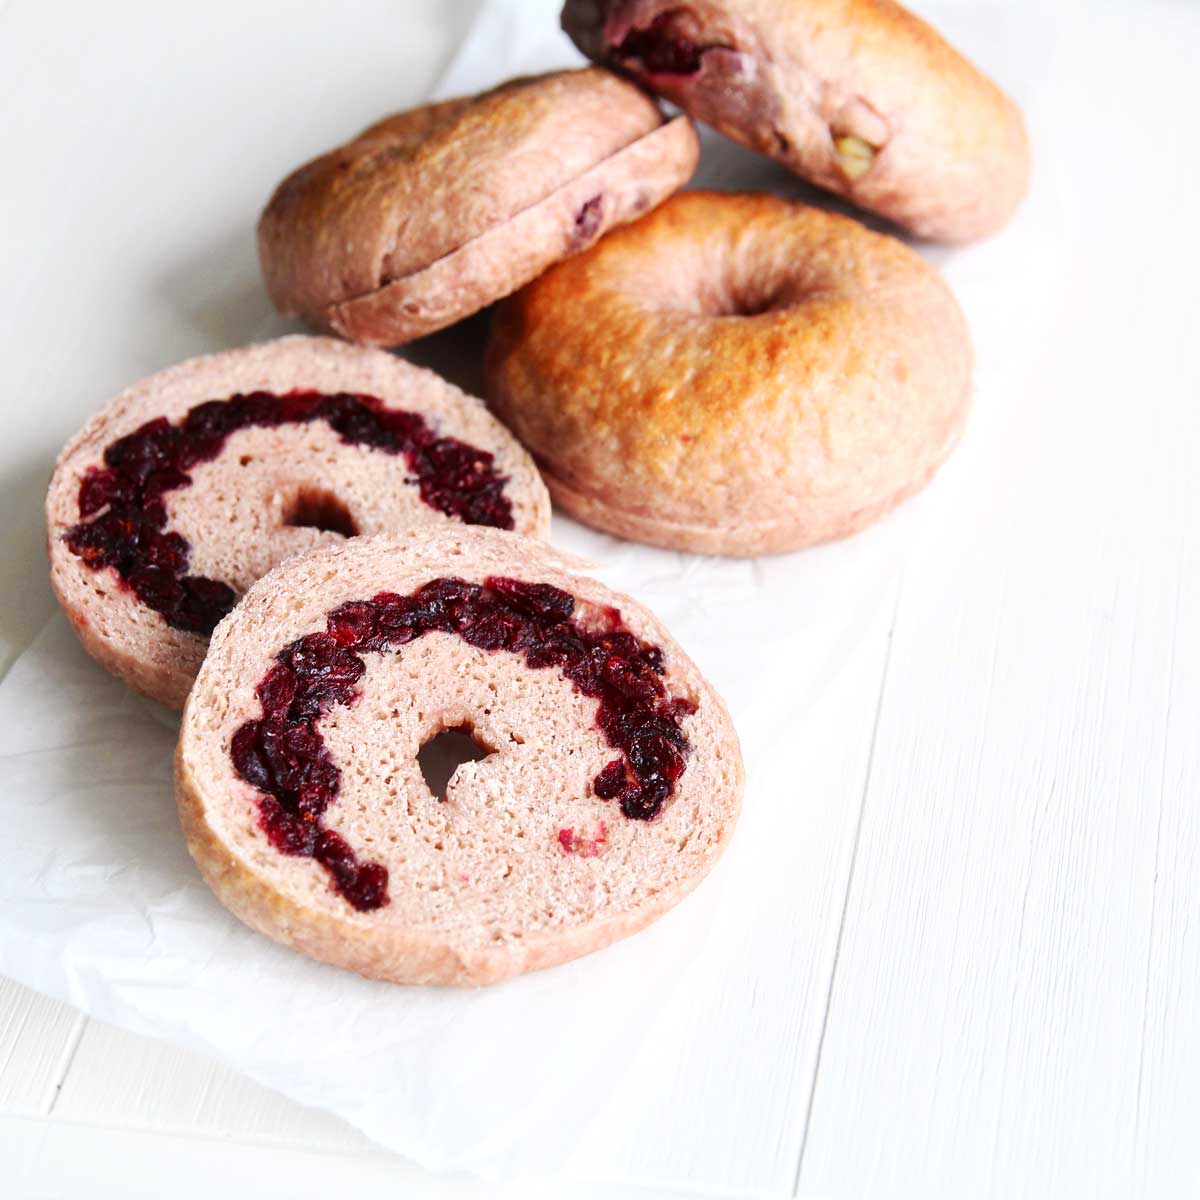 How To Make Stuffed Cranberry Bagels With Canned Cranberry Sauce - mugwort songpyeon